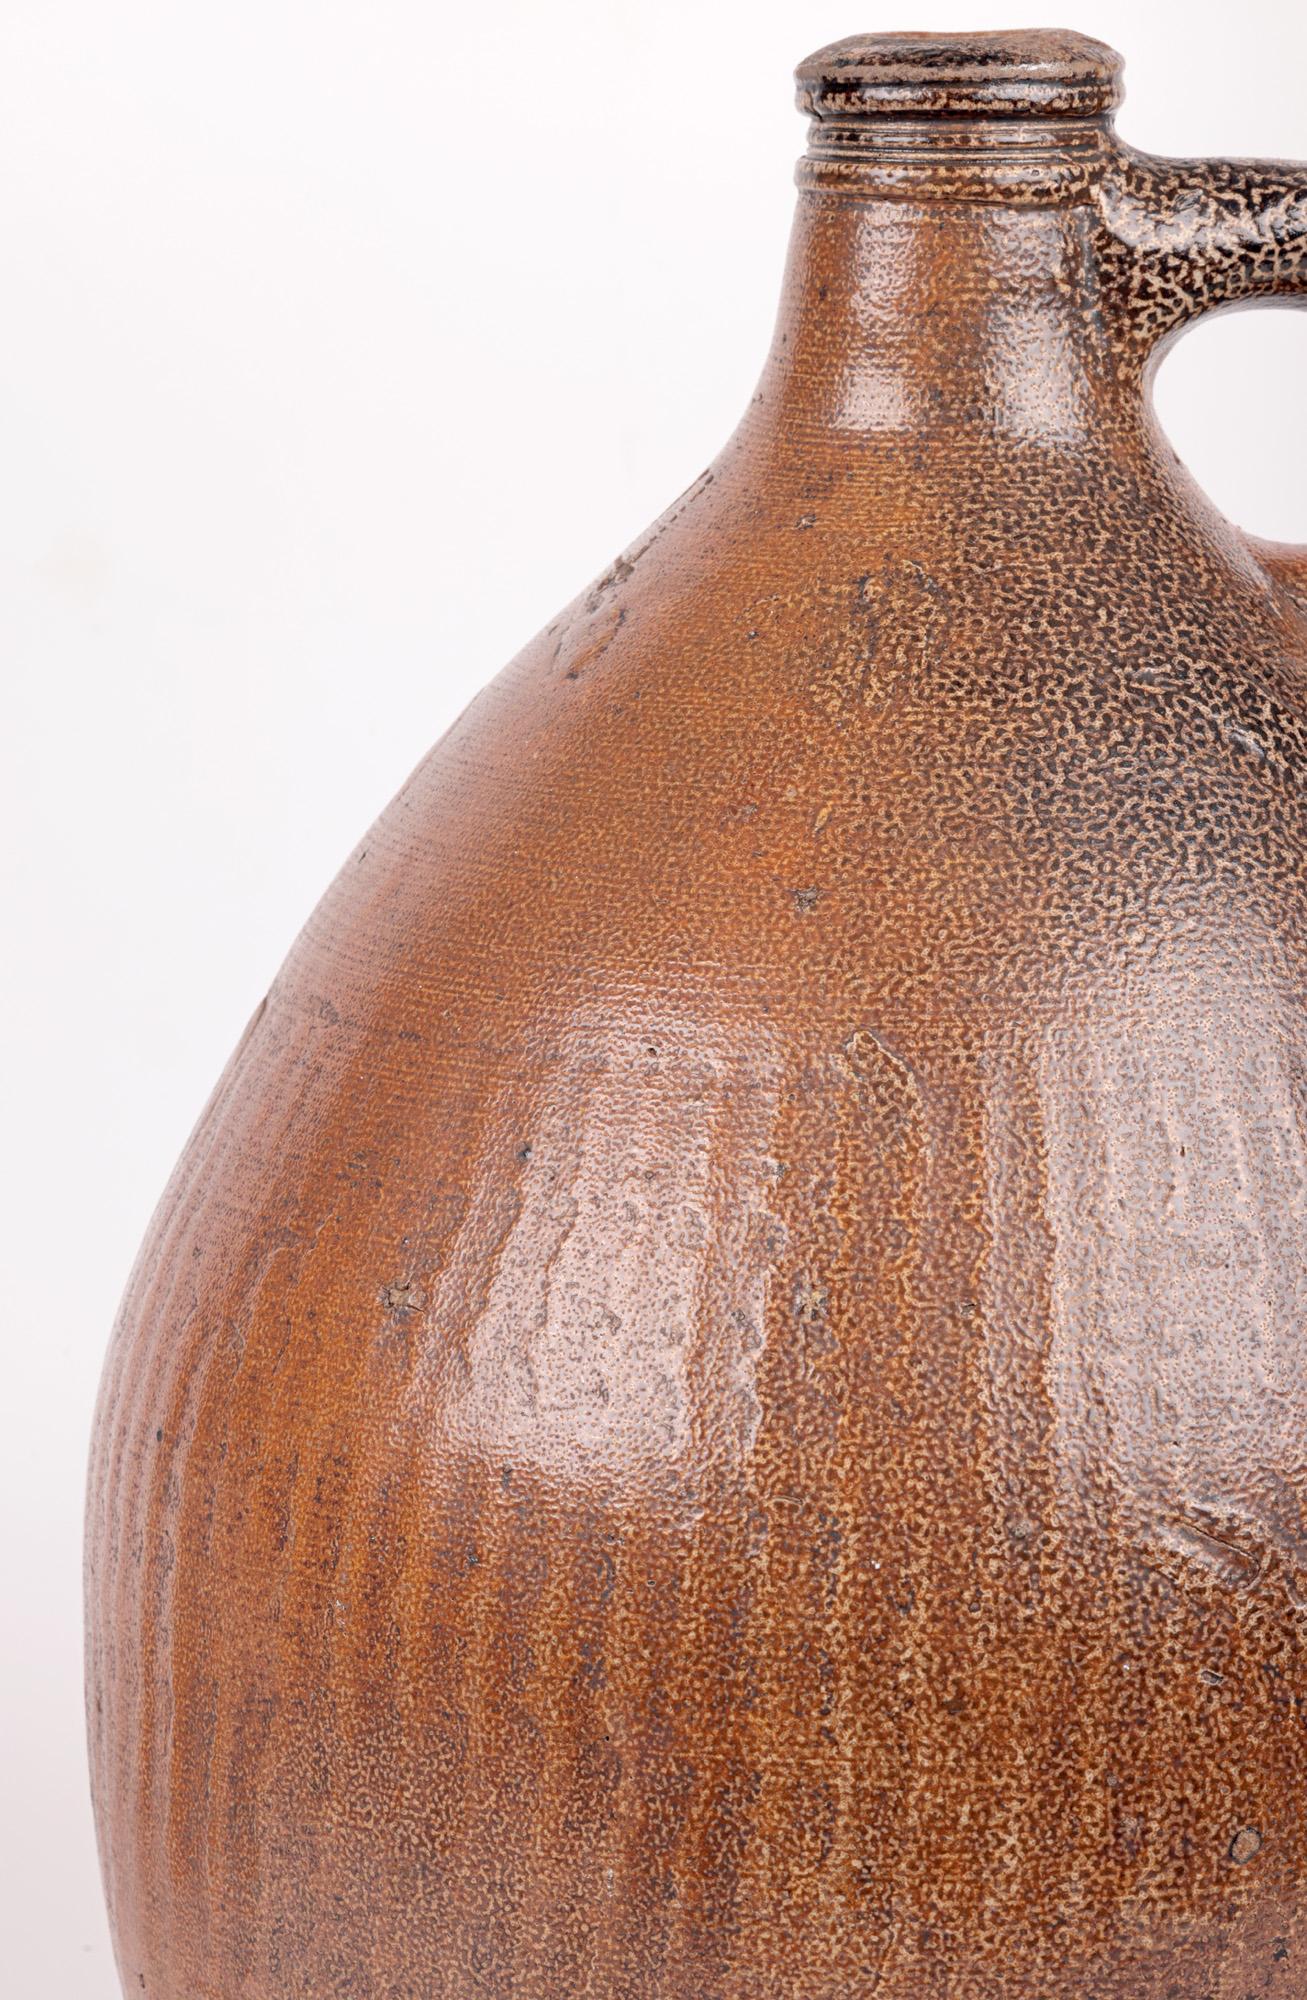 A large and highly impressive antique salt glazed Bellarmine dating from the 17th or early 18th century.  The stoneware Bellarmine stands on a narrow flat round base with a tall round bulbous body with a narrow neck and ring top with a small thick